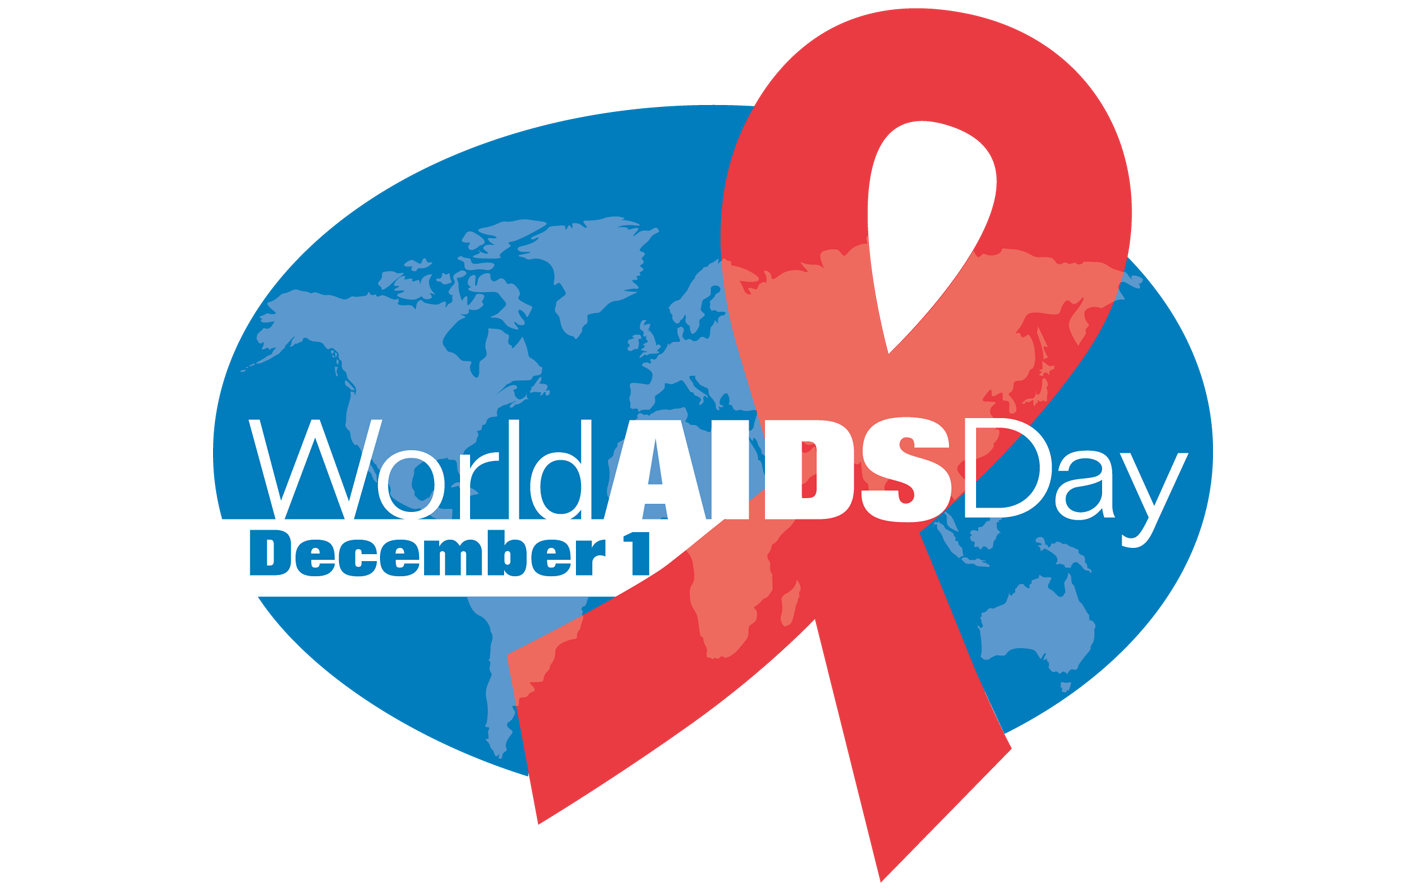 Cool Blue Quizlet Logo - Quizlet of the Week: World AIDS Day